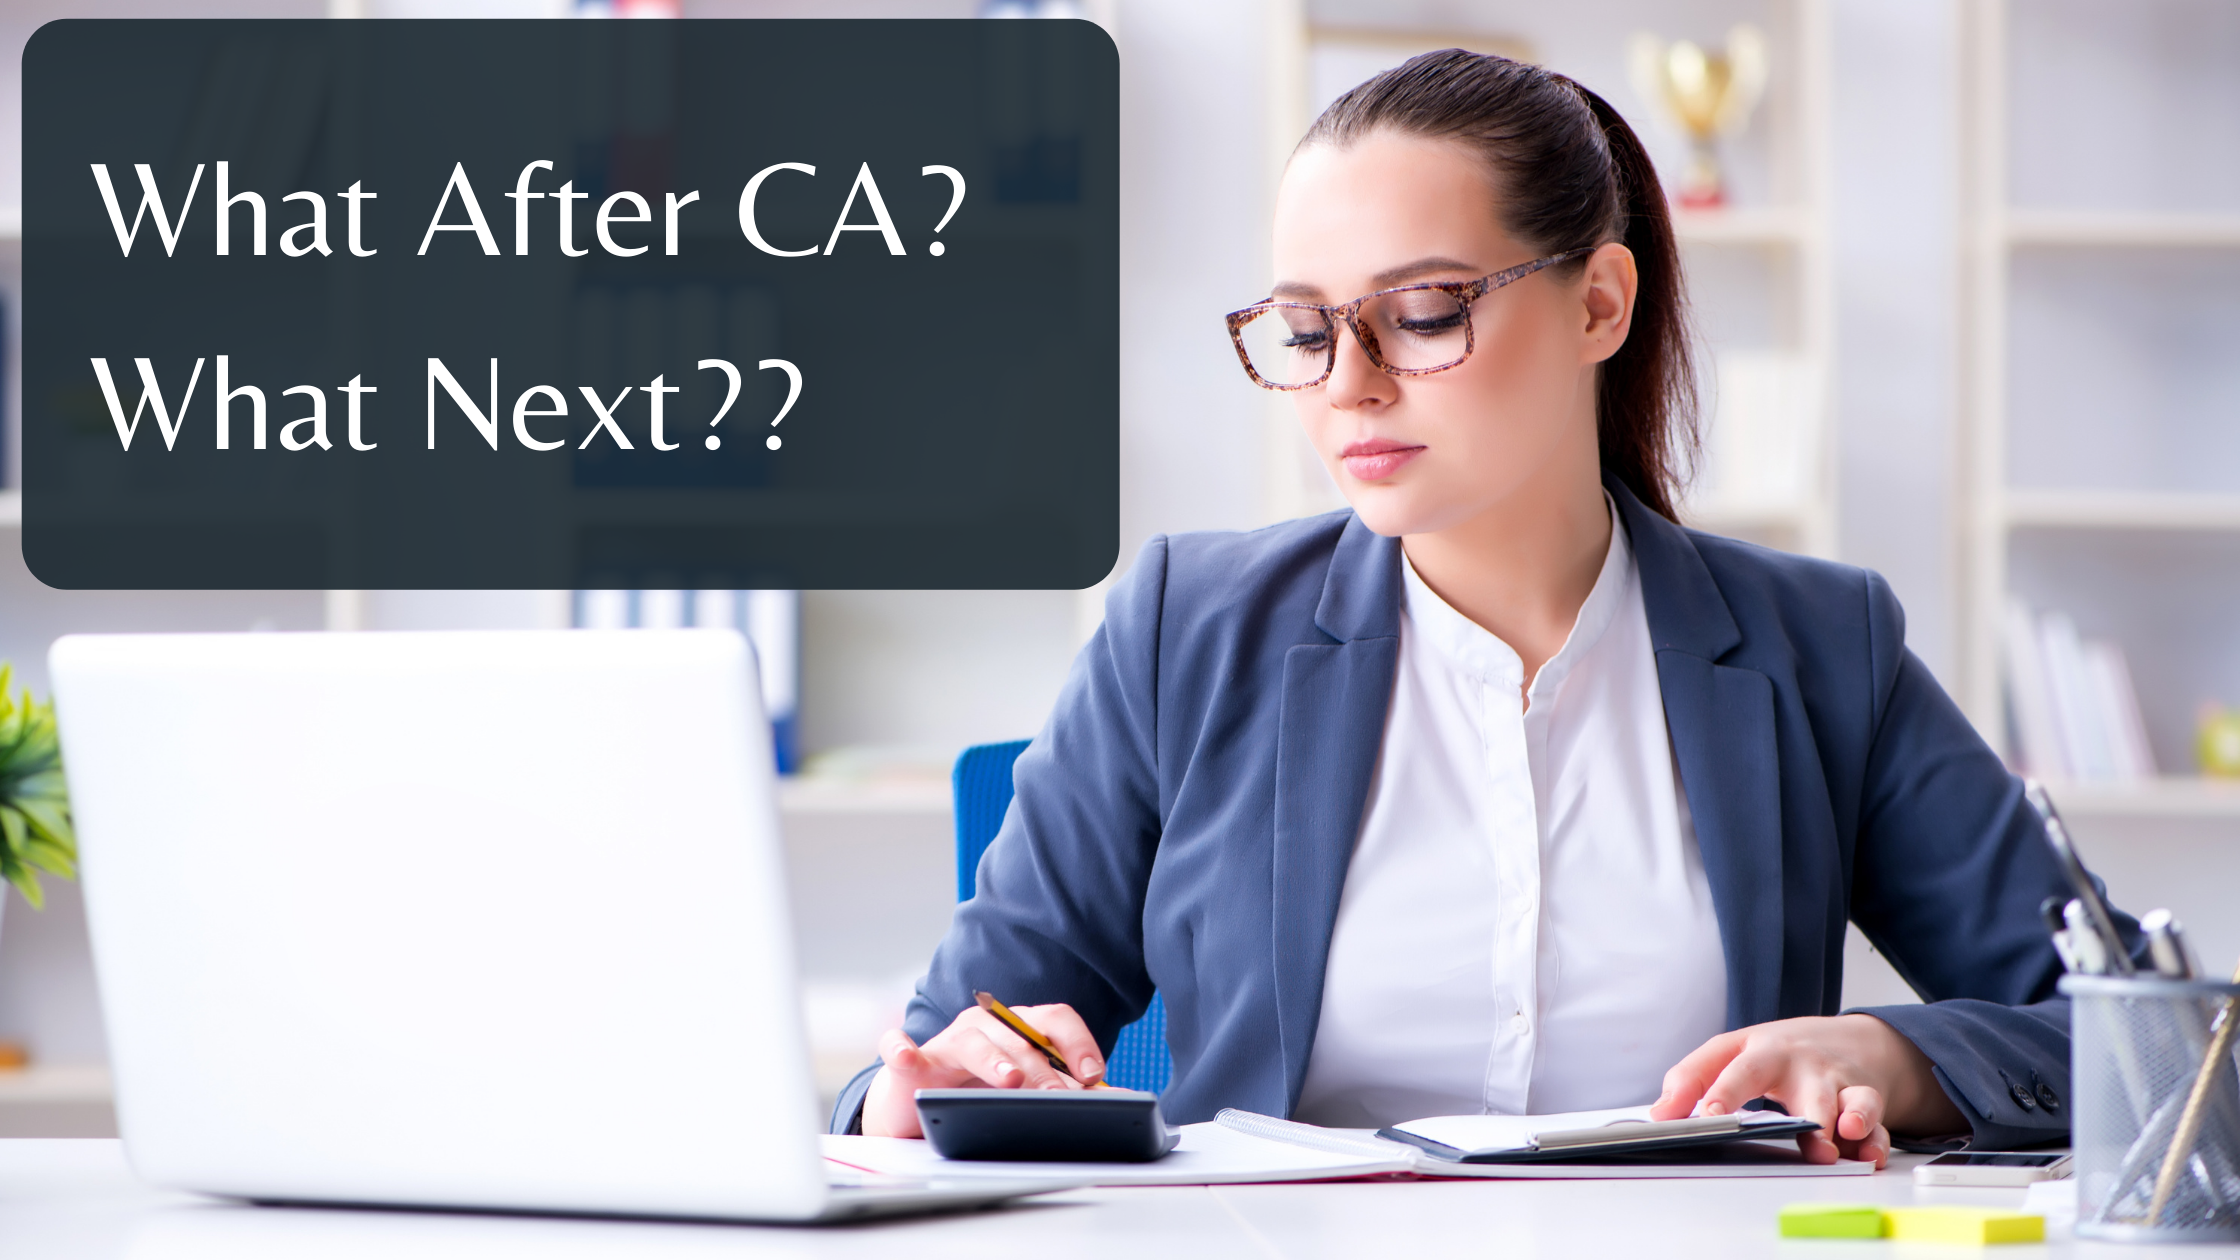 What Next? Career Options After CA